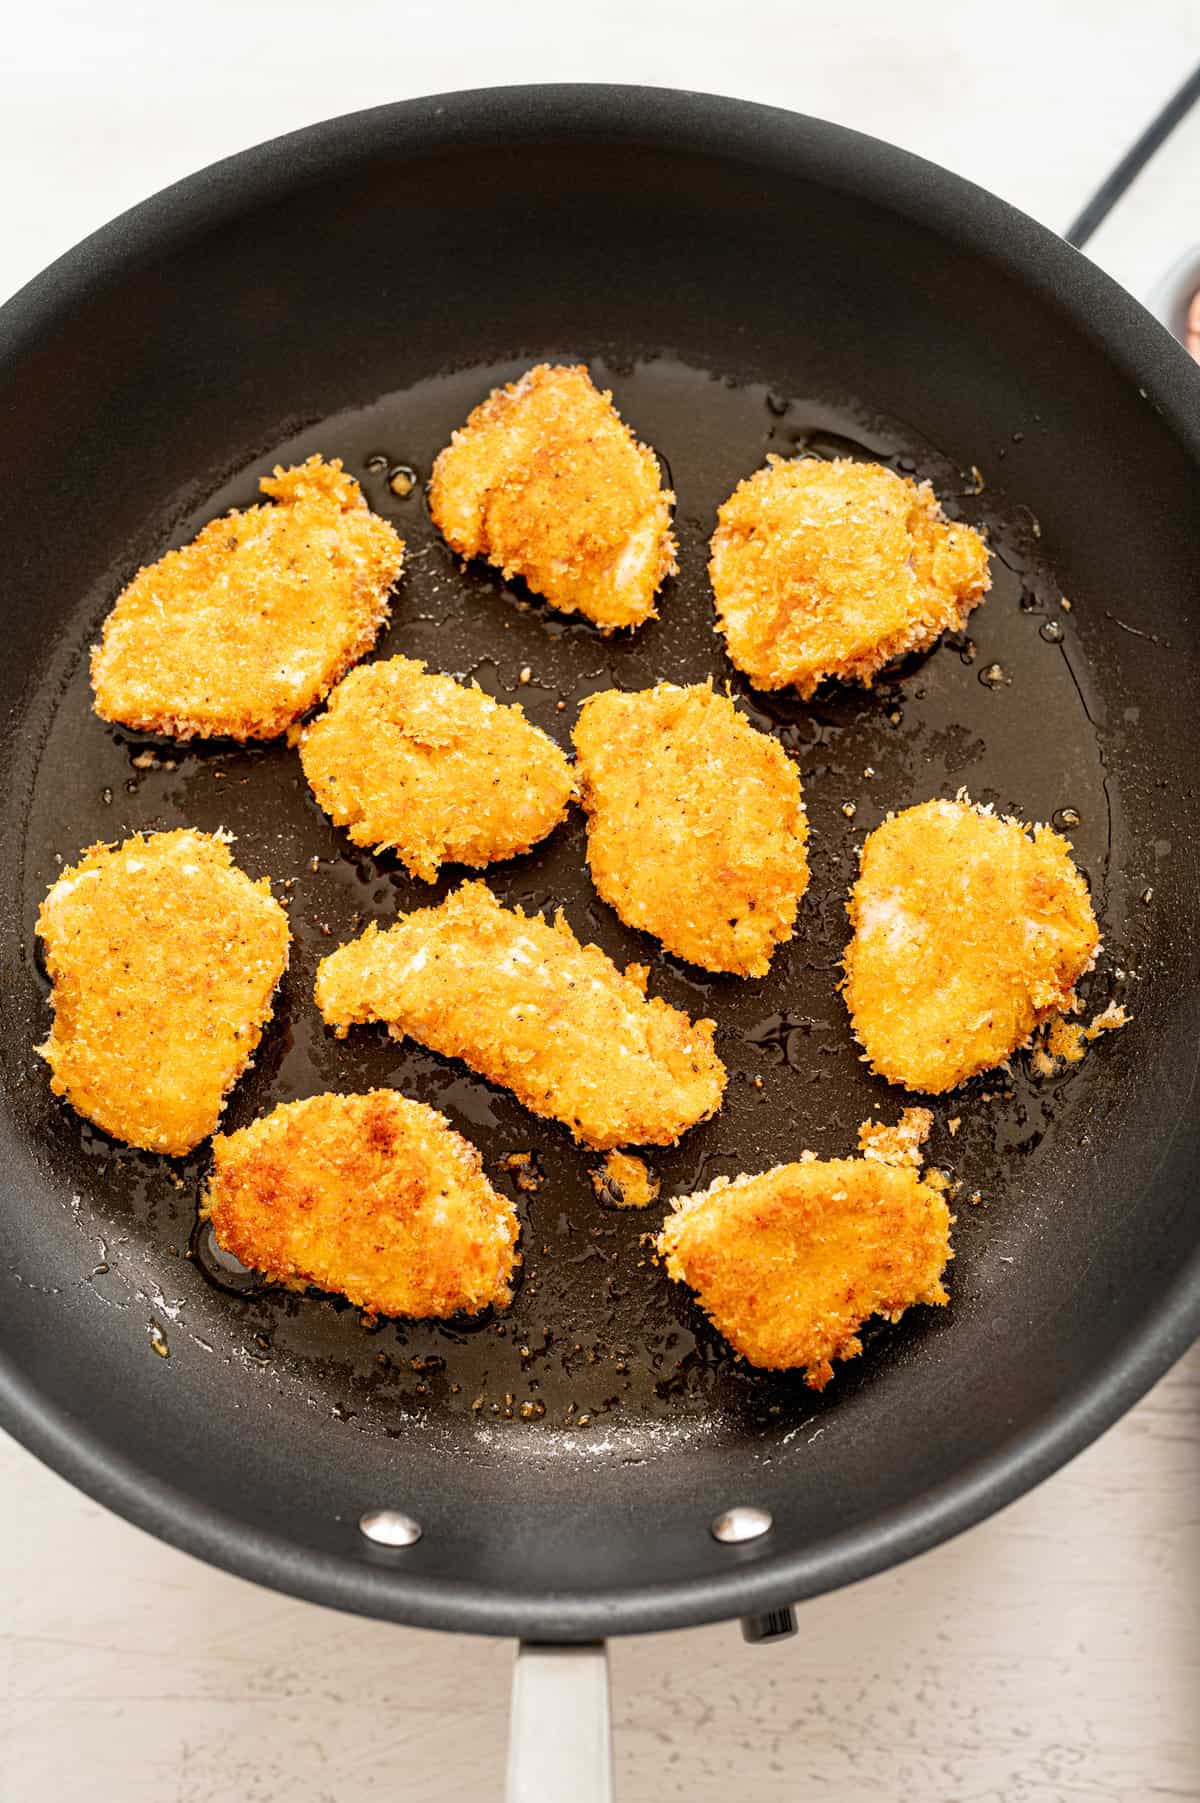 Chicken nuggets cooking in a skillet with a little oil.